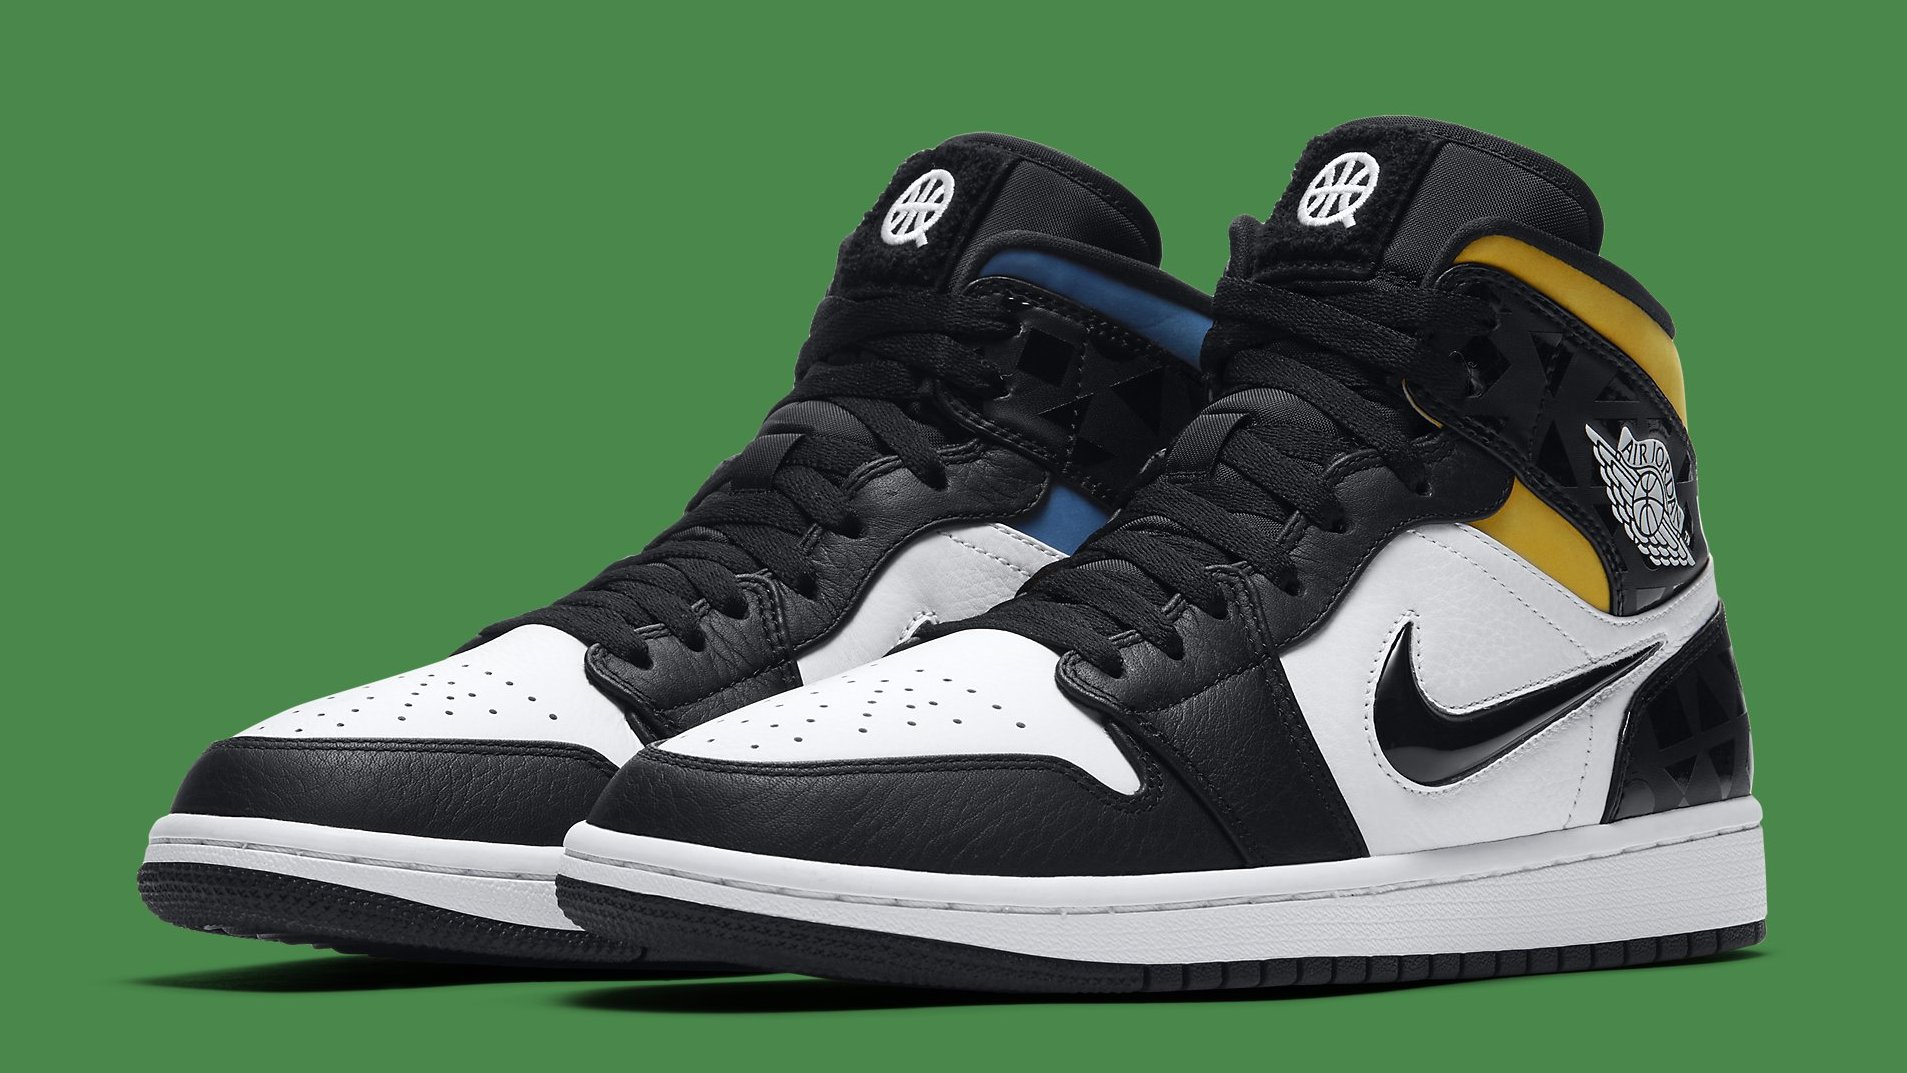 The Air Jordan 1 Mid Is Joining This Year's Quai 54 Lineup | Complex